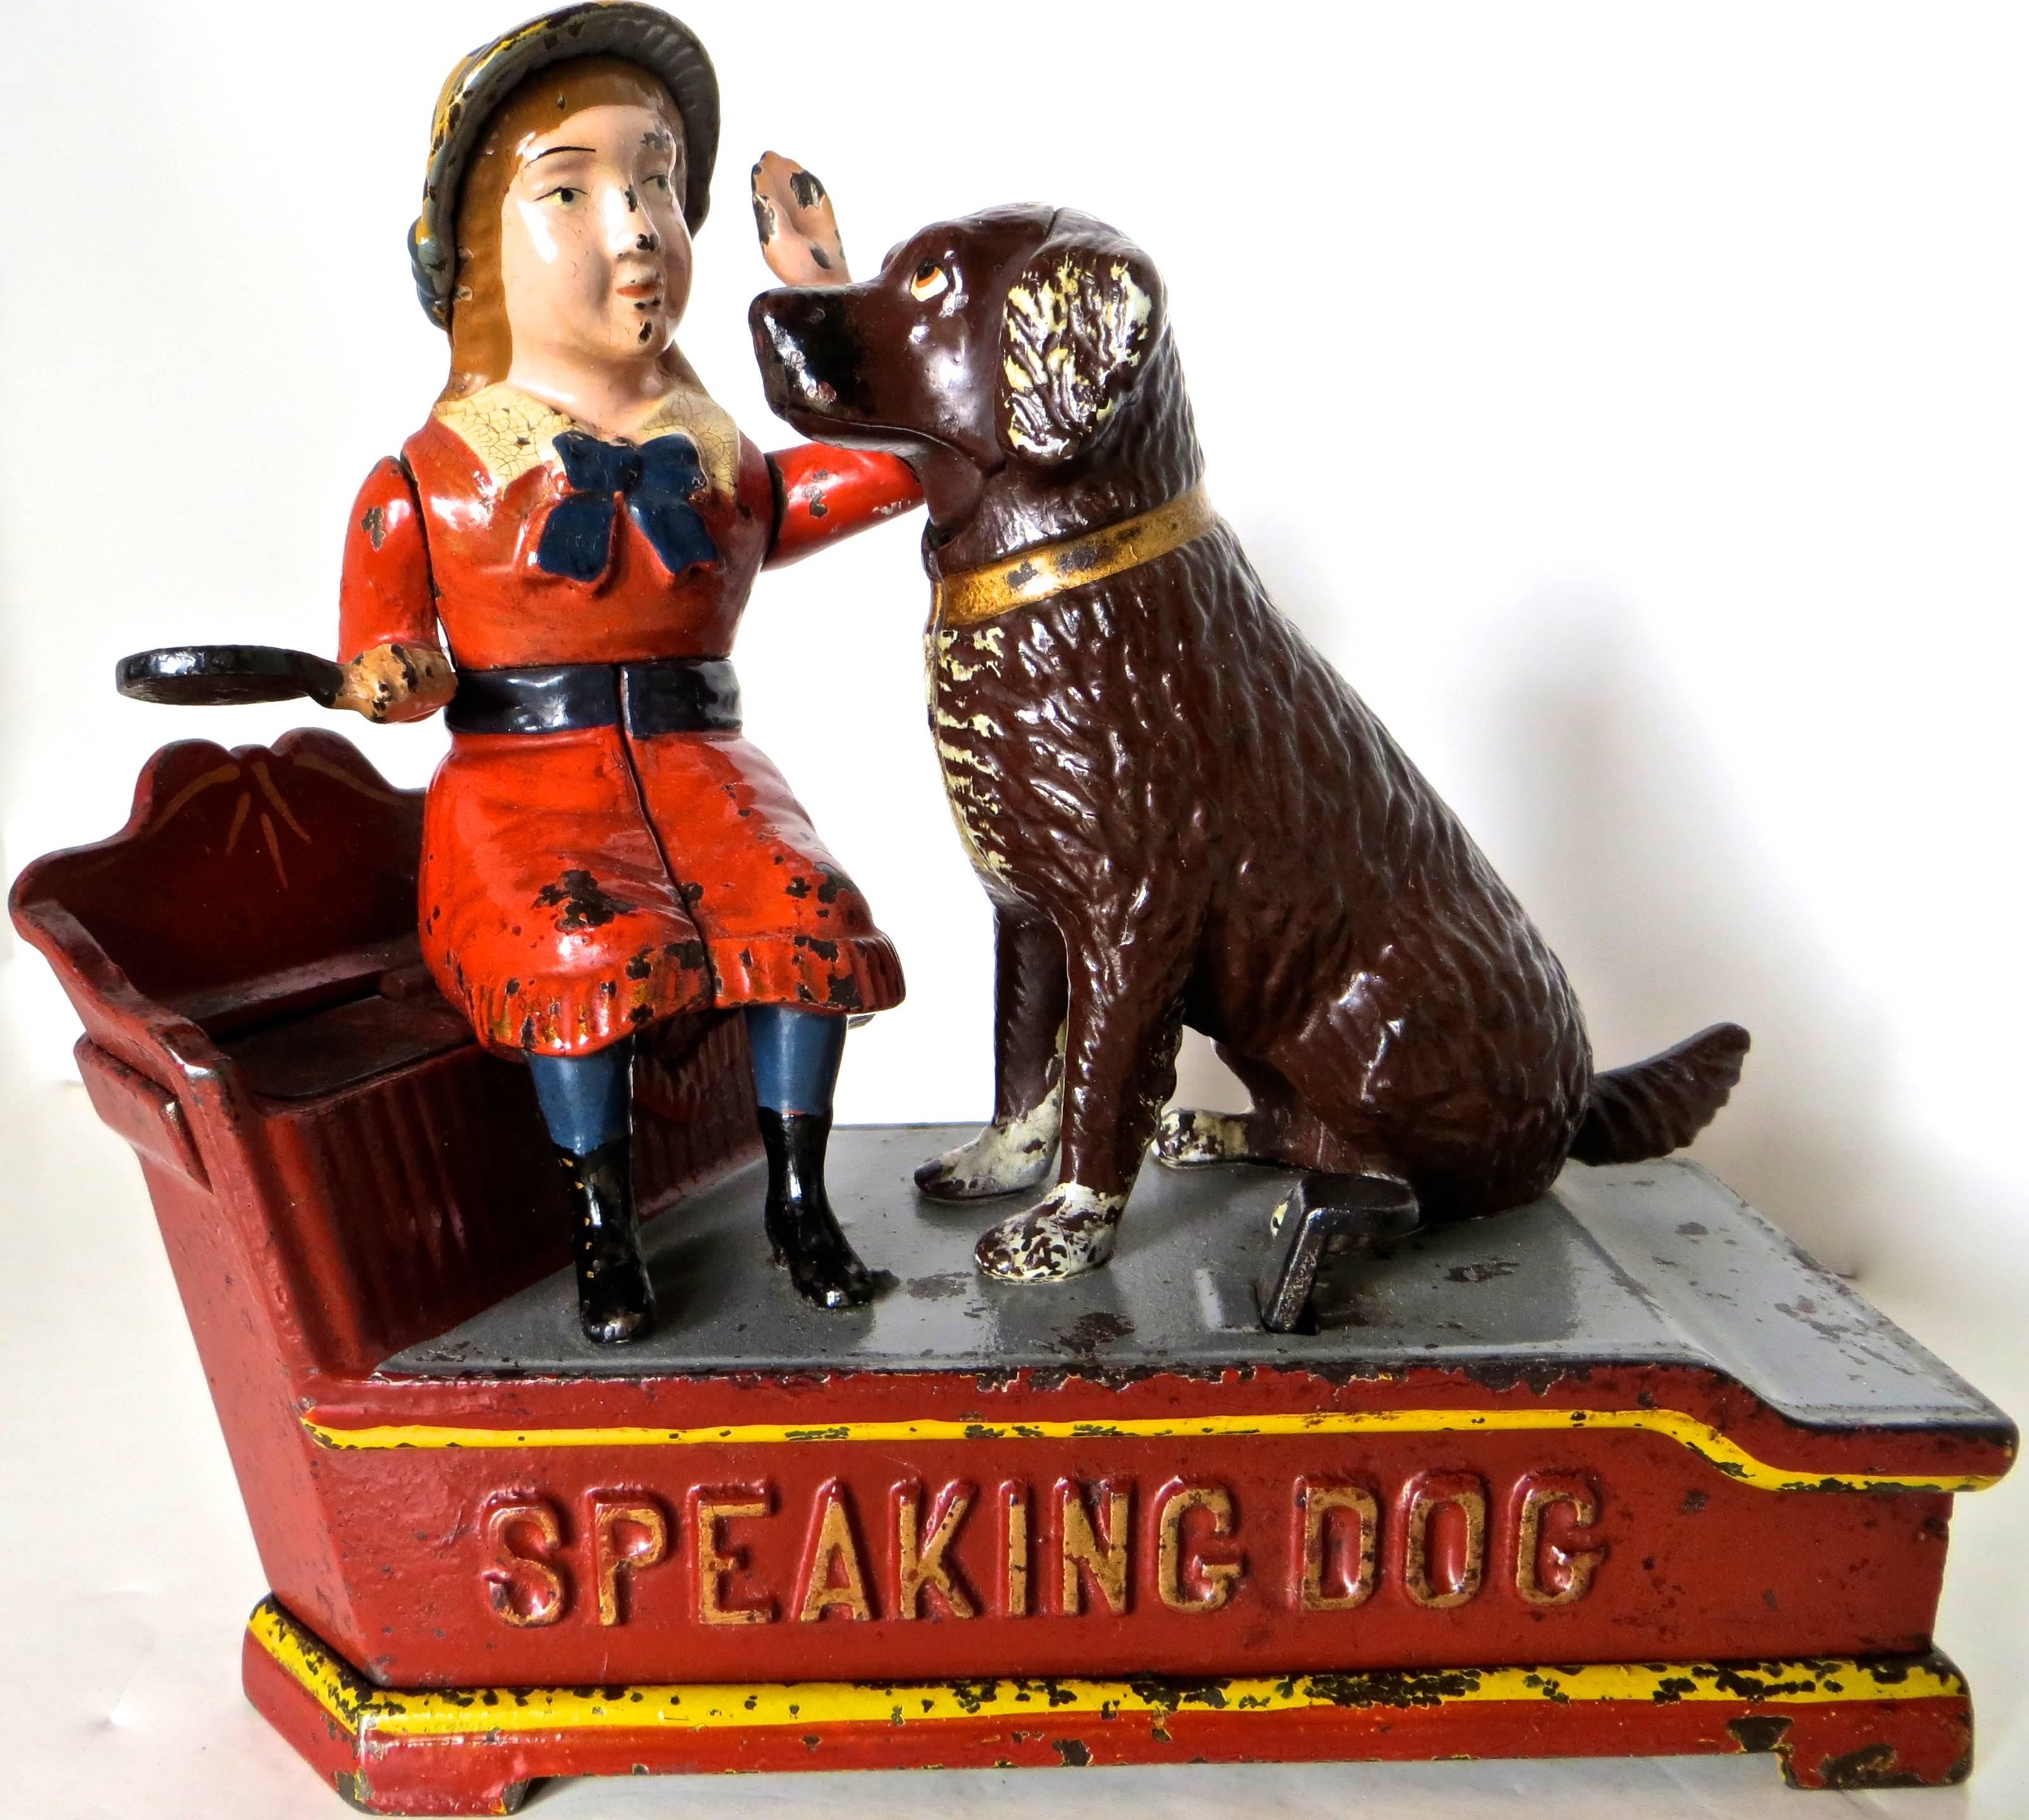 This particular example is one of the top condition "Speaking Dog" mechanical banks known to exist. Manufactured in 1885 by the Shepard Hardware Company in Buffalo, New York, this cast iron mechanical bank measures 7 1/8" long and is